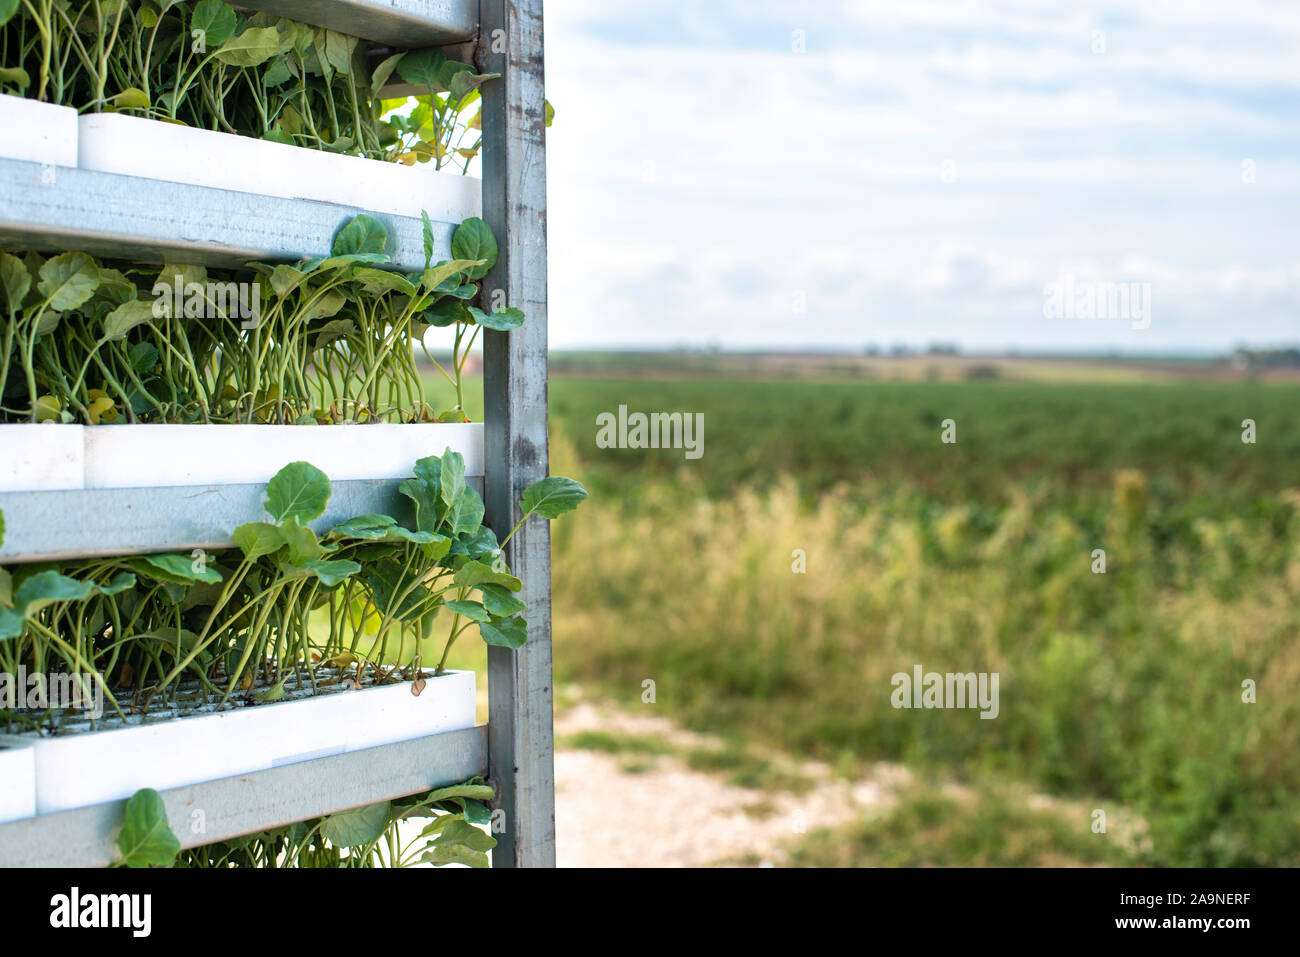 Seedlings in packages placed on shelving in the field. Concept for planting new plants on agriculture field. Stock Photo